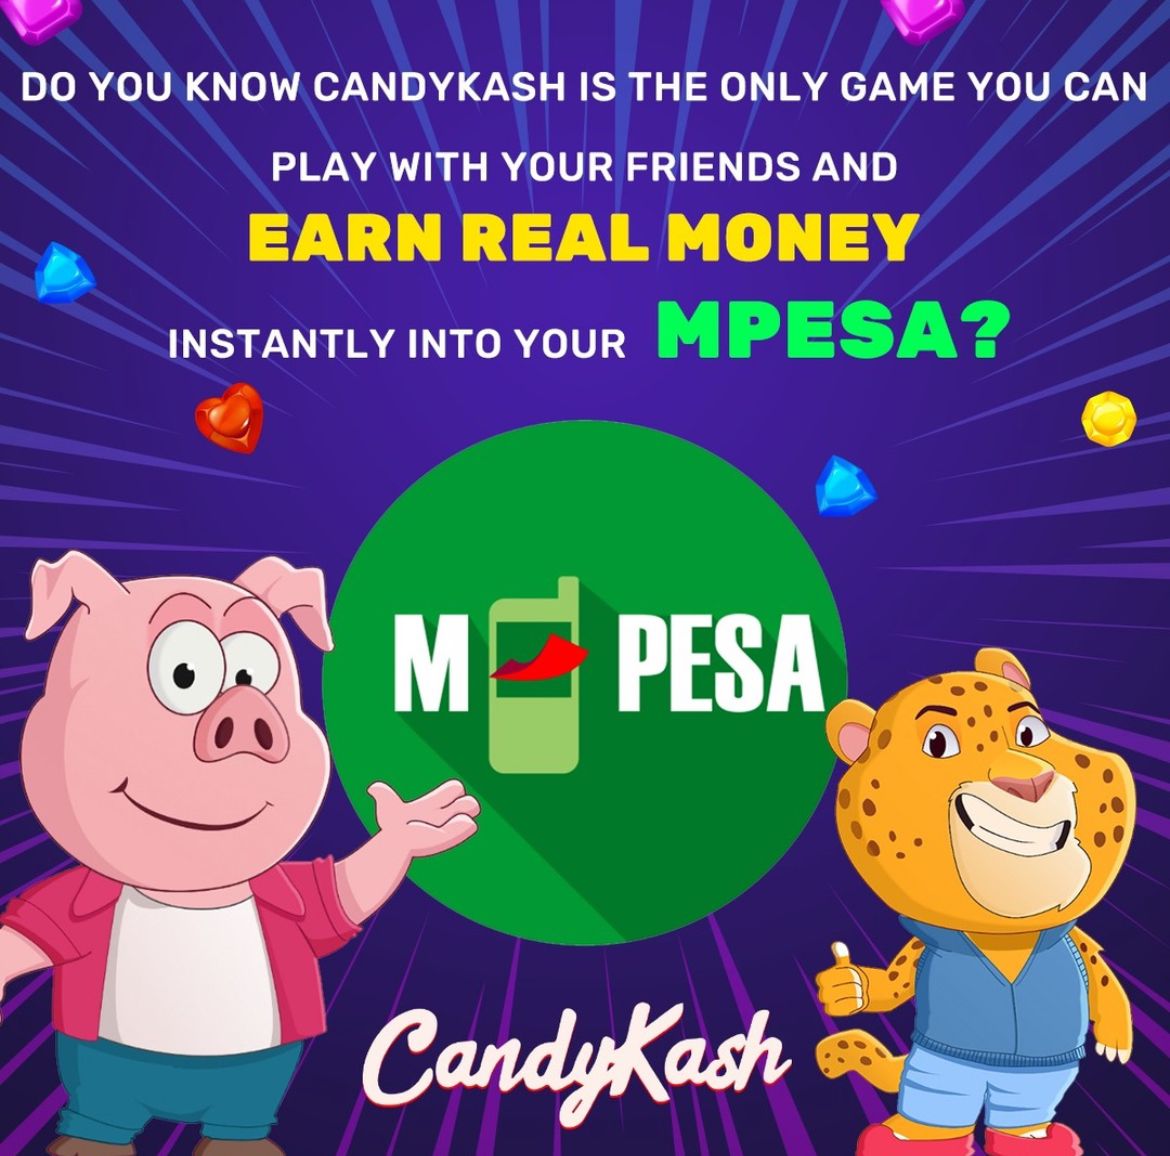 Get rewarded for your gaming prowess with Candy Kash! Play, win, and earn real money while having fun!